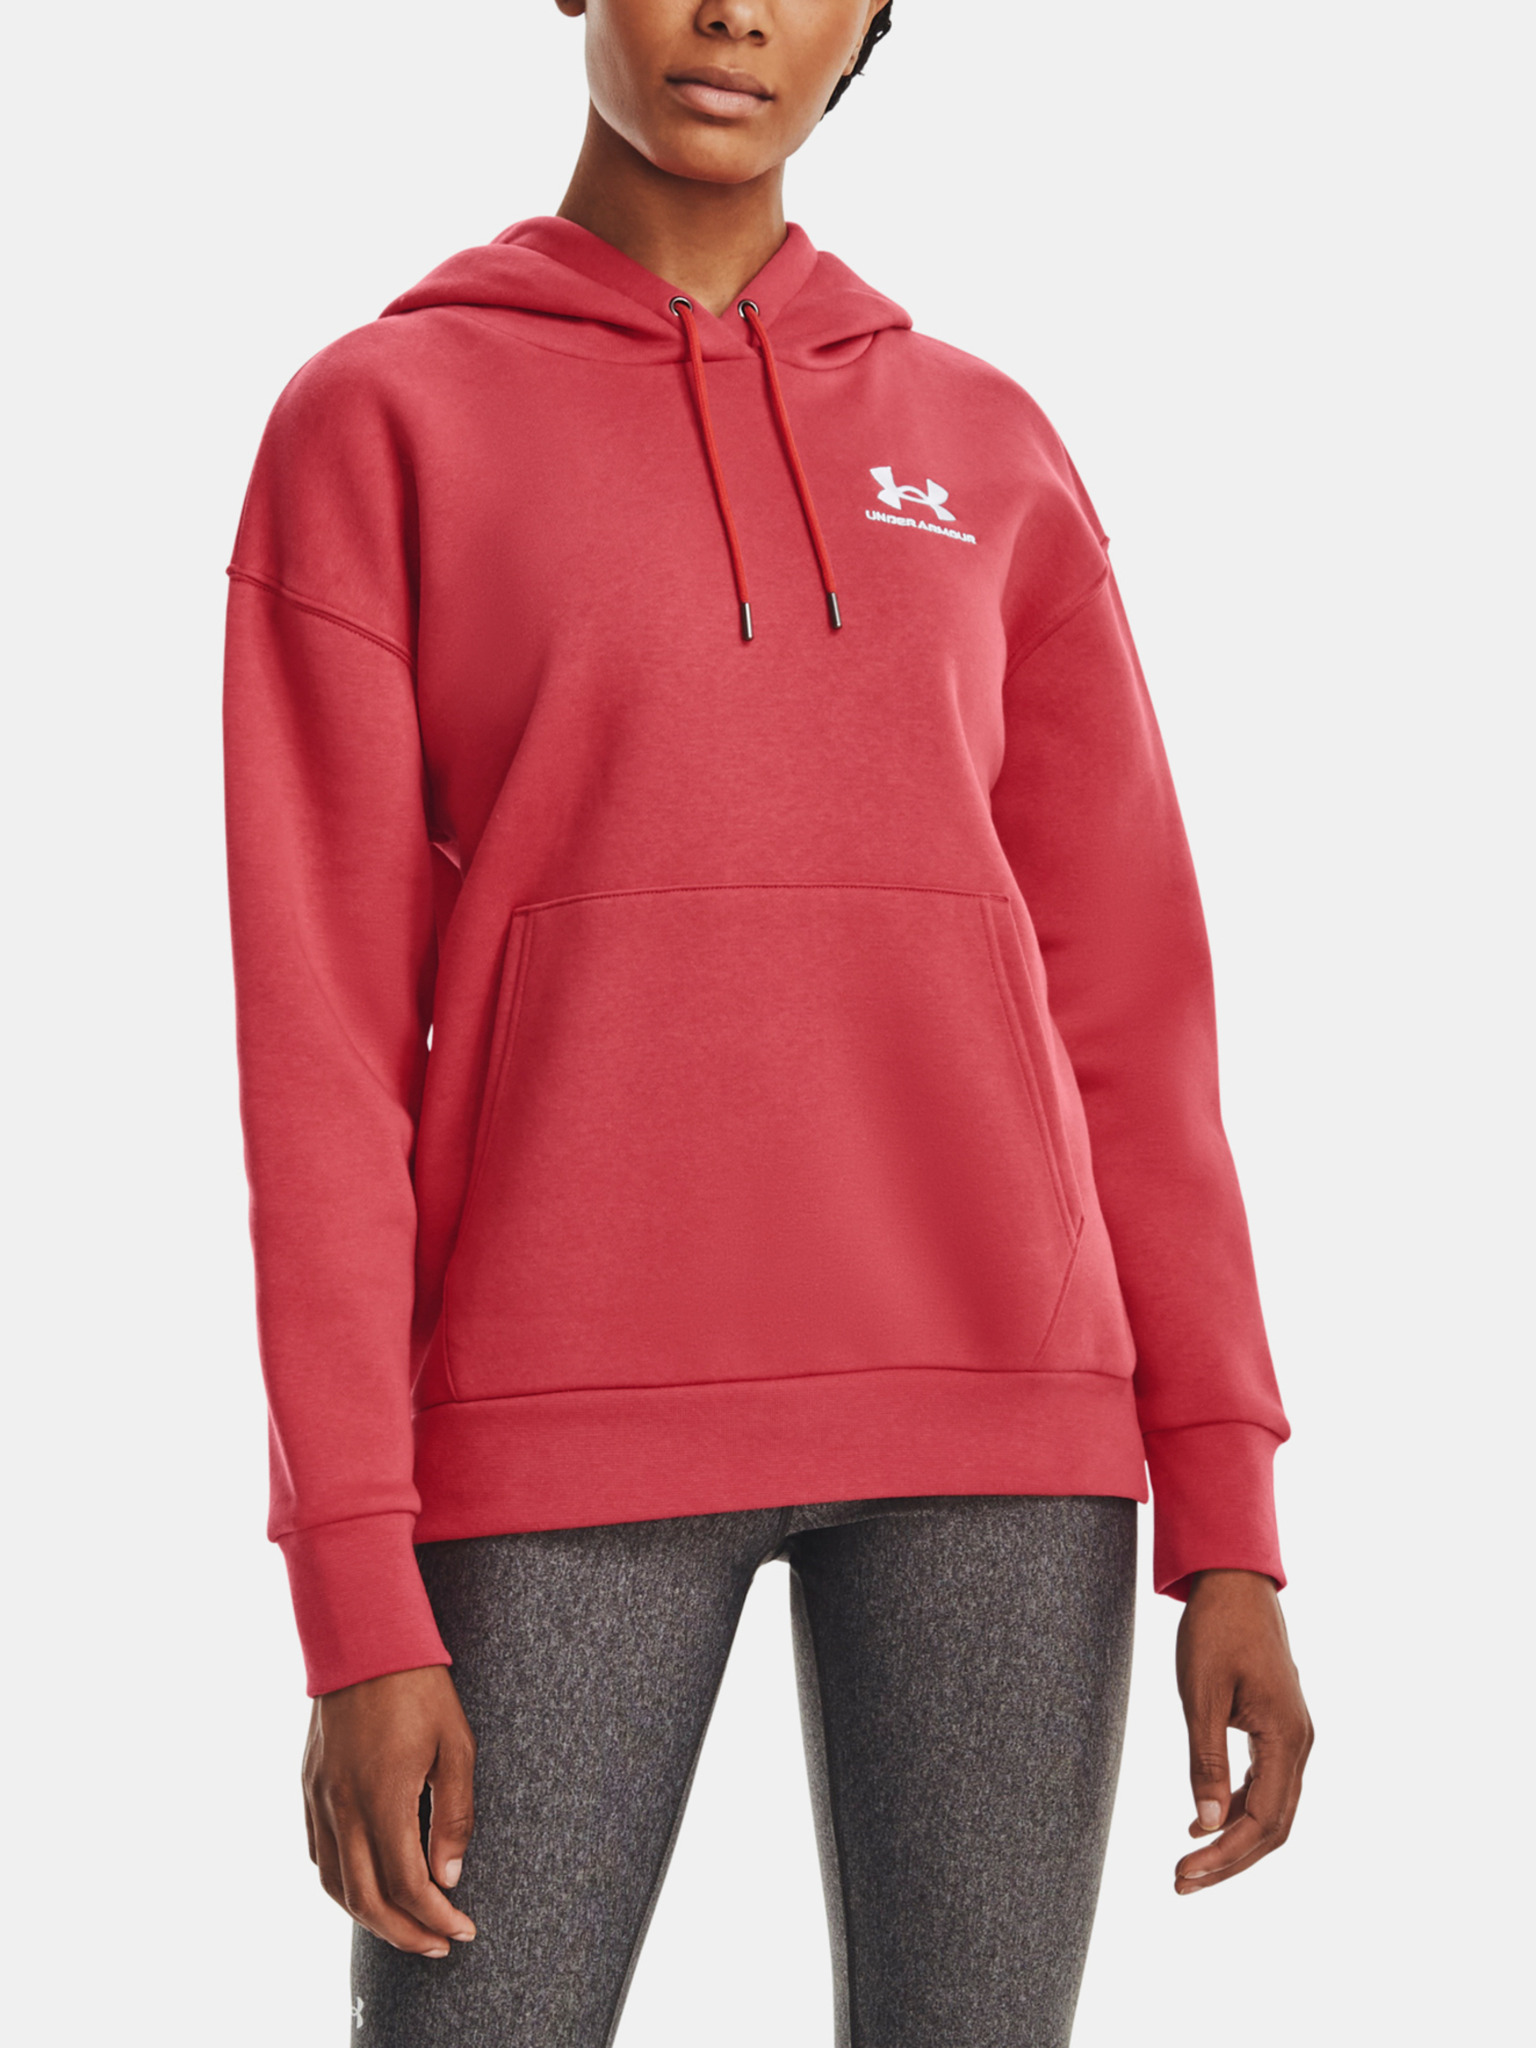 Under Armour Essential Hoodie Womens Red, £30.00